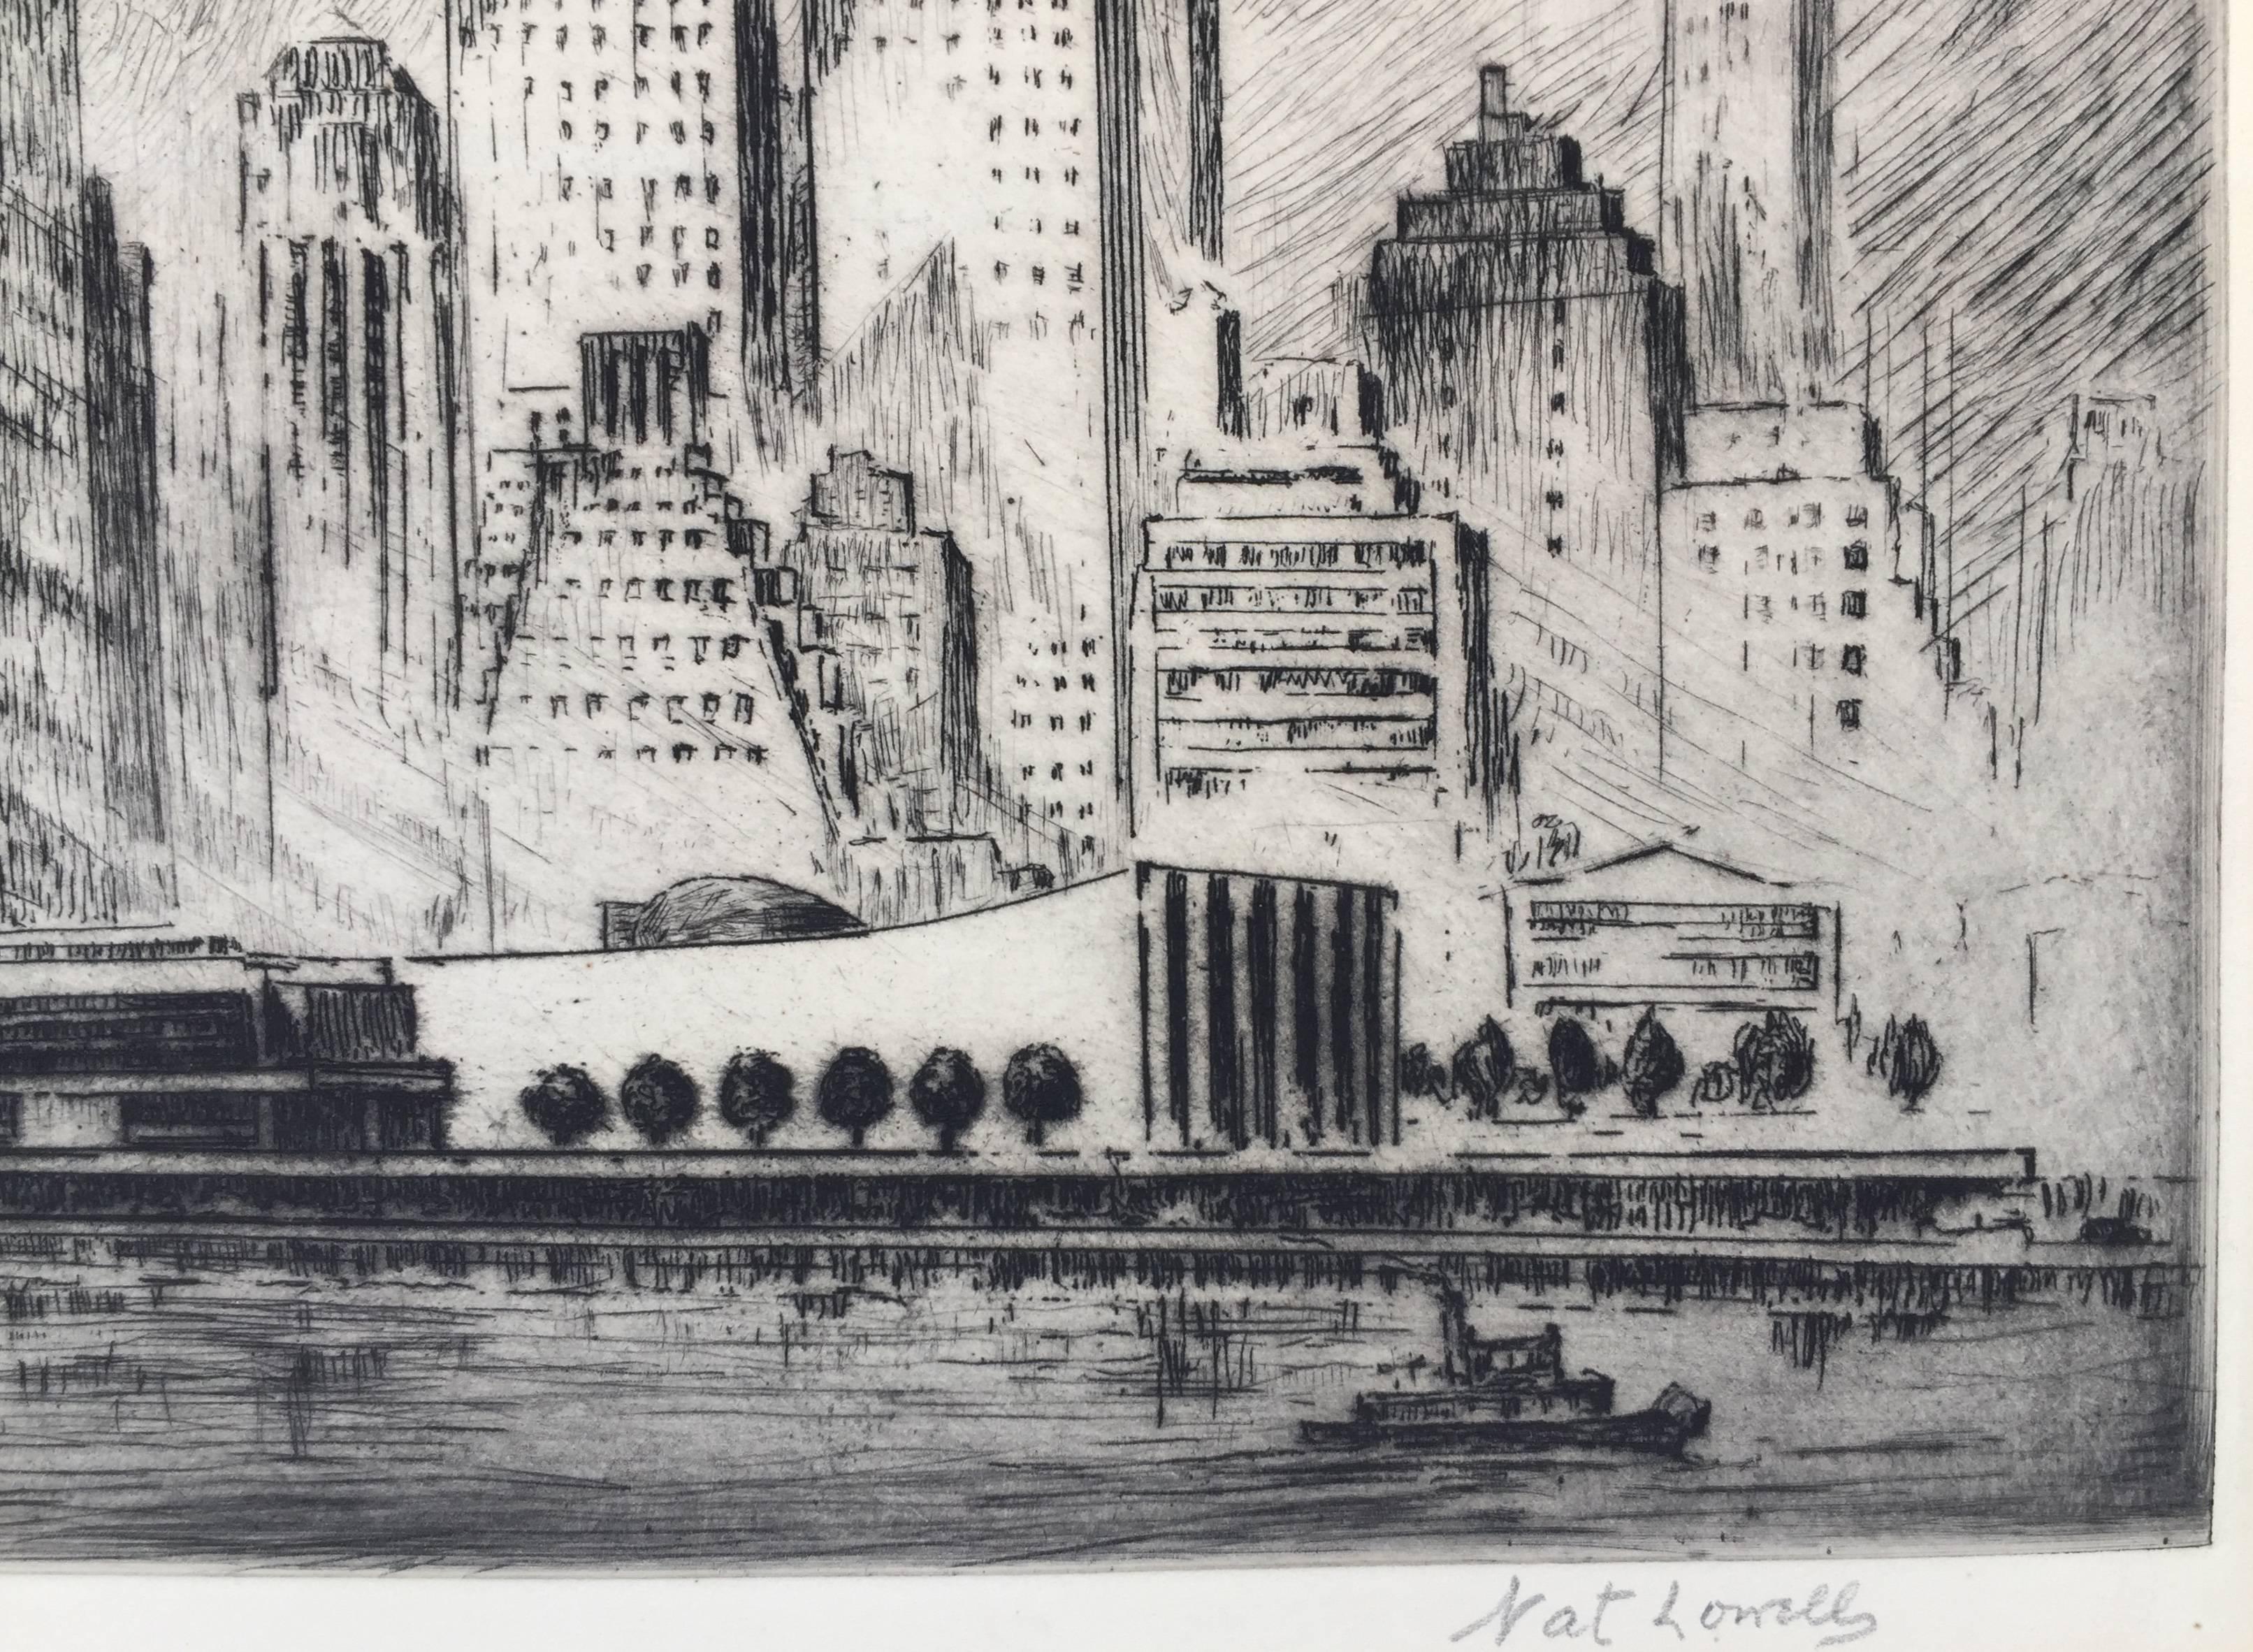 UNITED NATIONS BUILDING, NEW YORK - Print by Nat Lowell